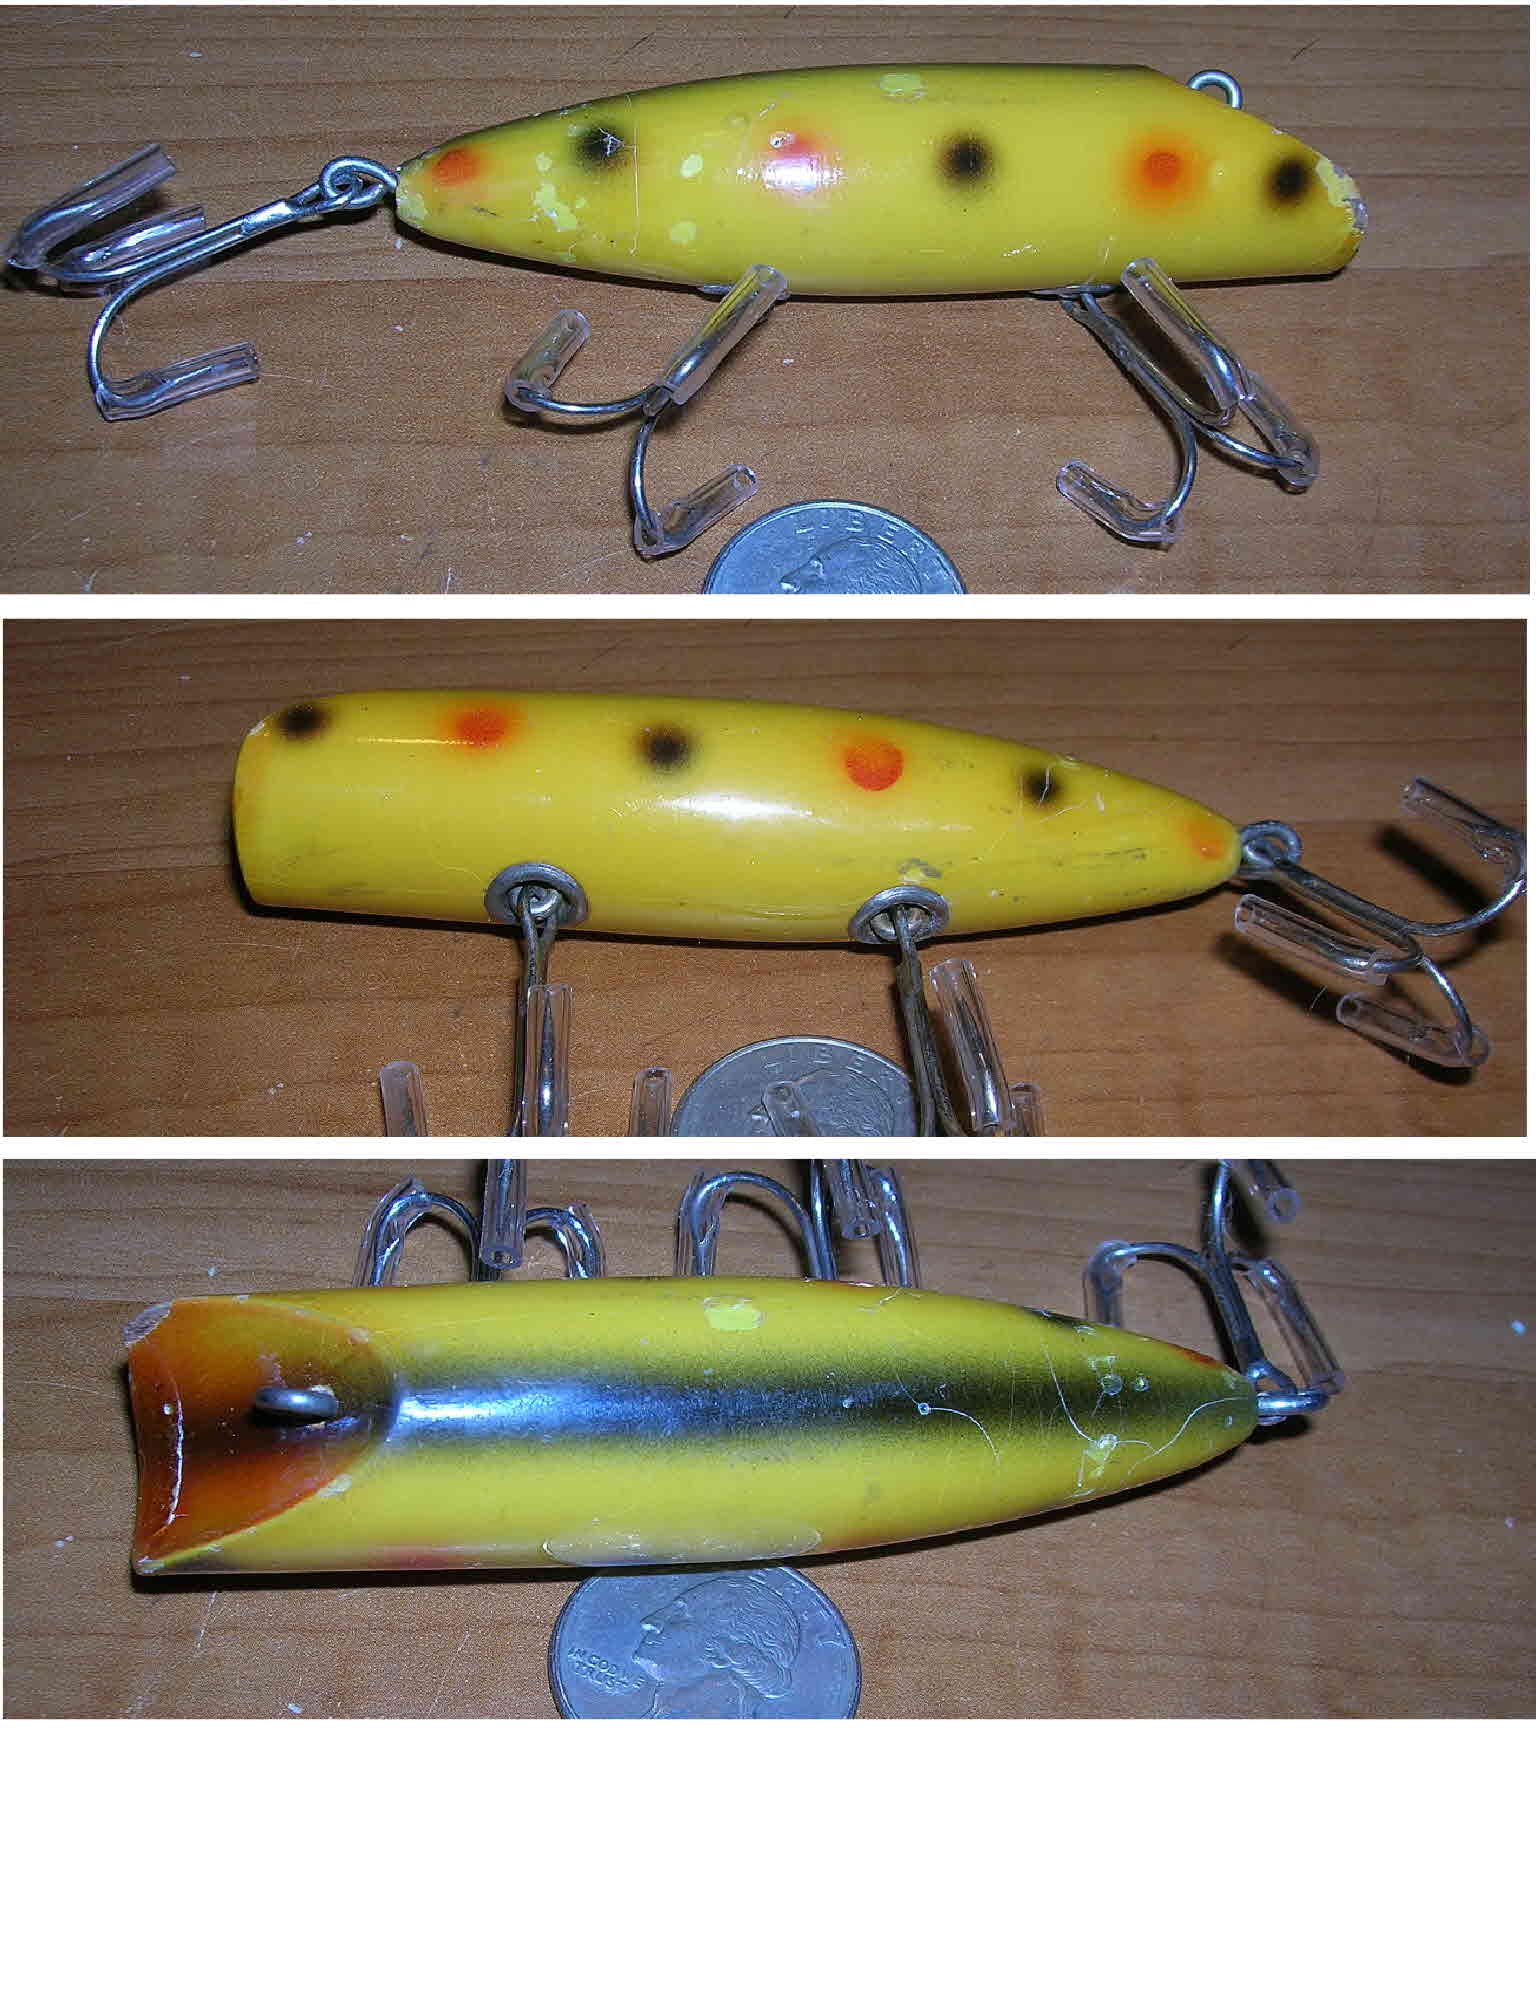 South Bend Fishing Lures Rock Hopper Ad - 10' x 7 Reproduction